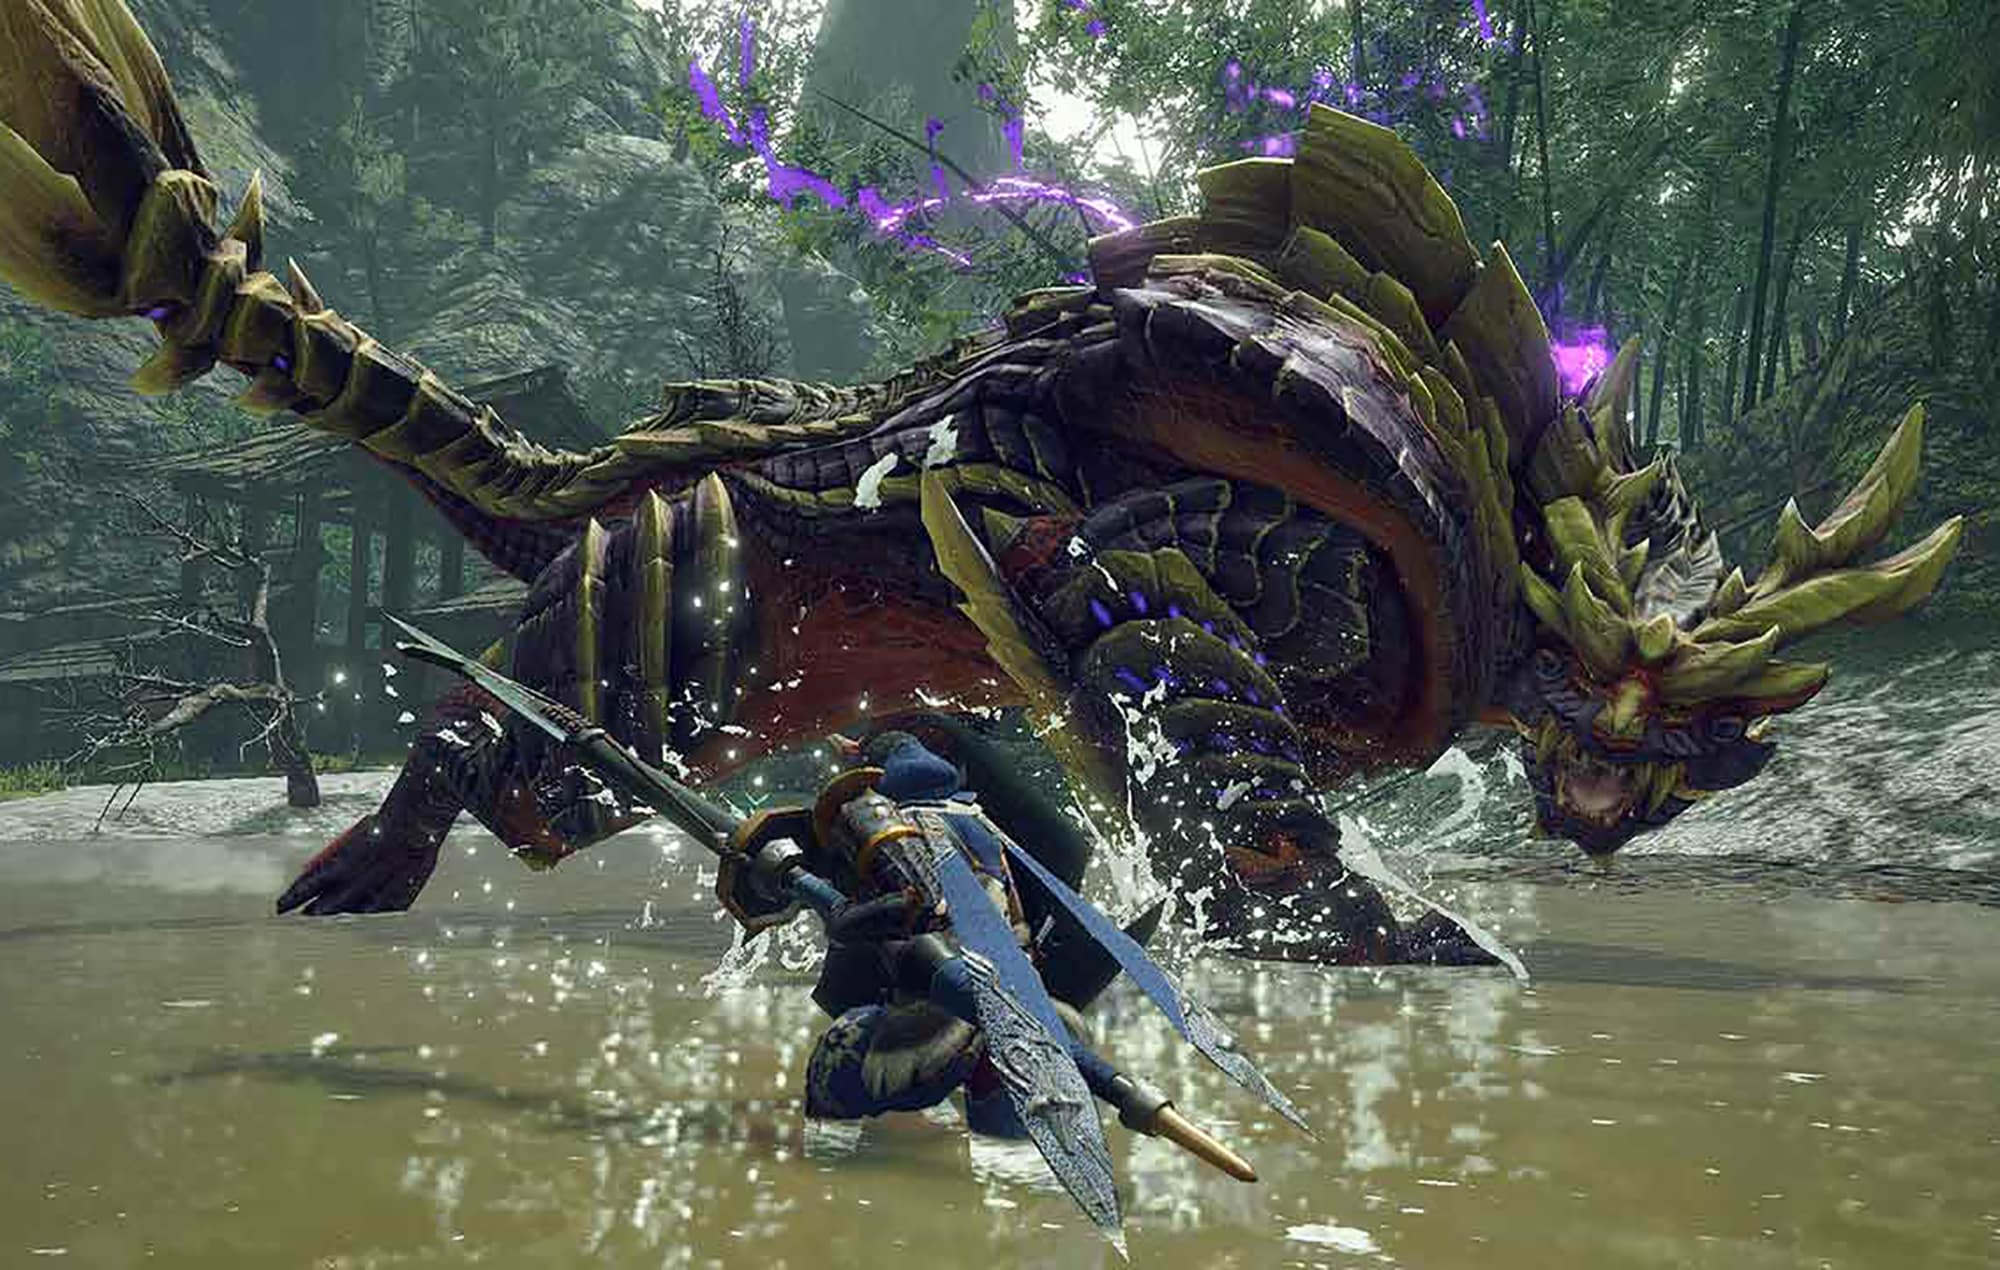 Monster Hunter rise screenshot showing a monster and player meeting in a river